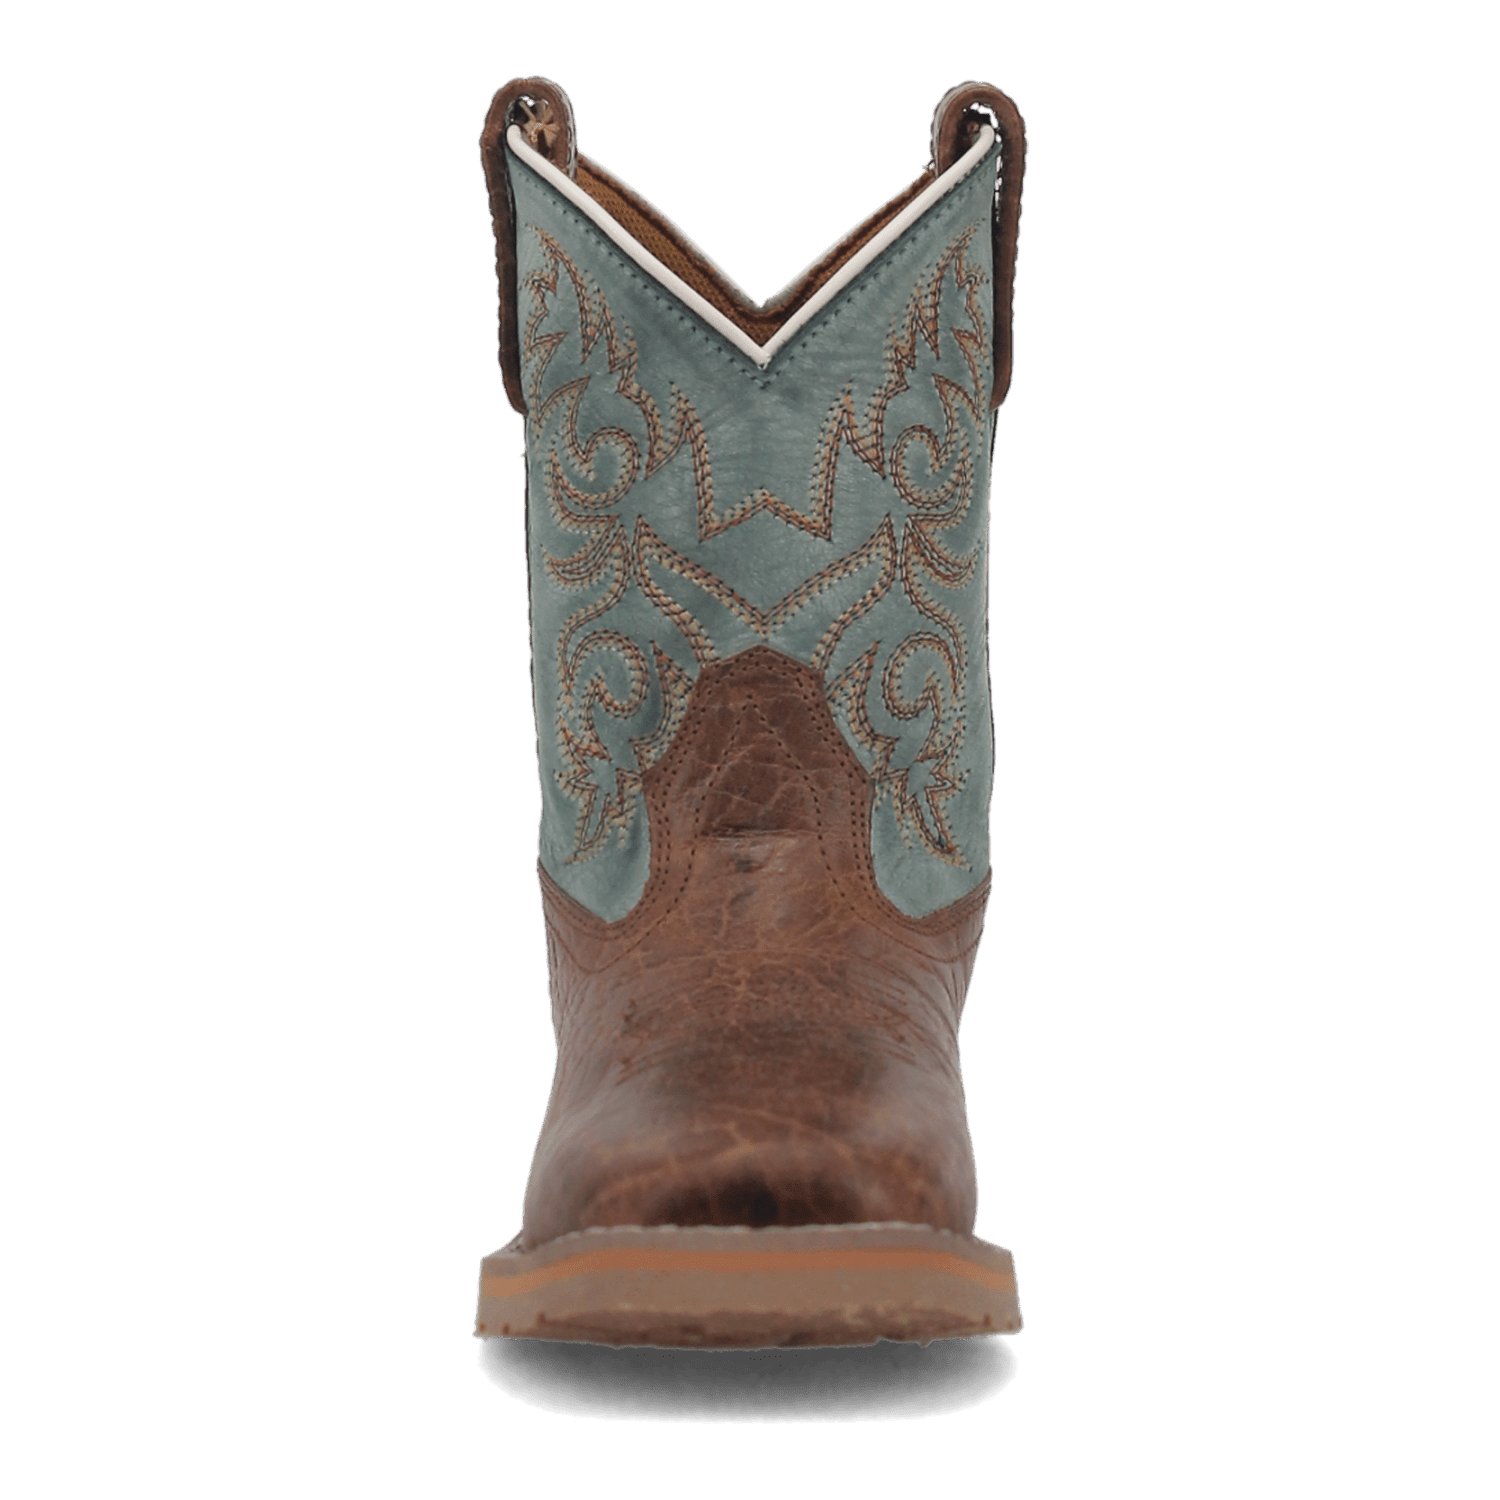 LIL' BISBEE LEATHER YOUTH BOOT Image